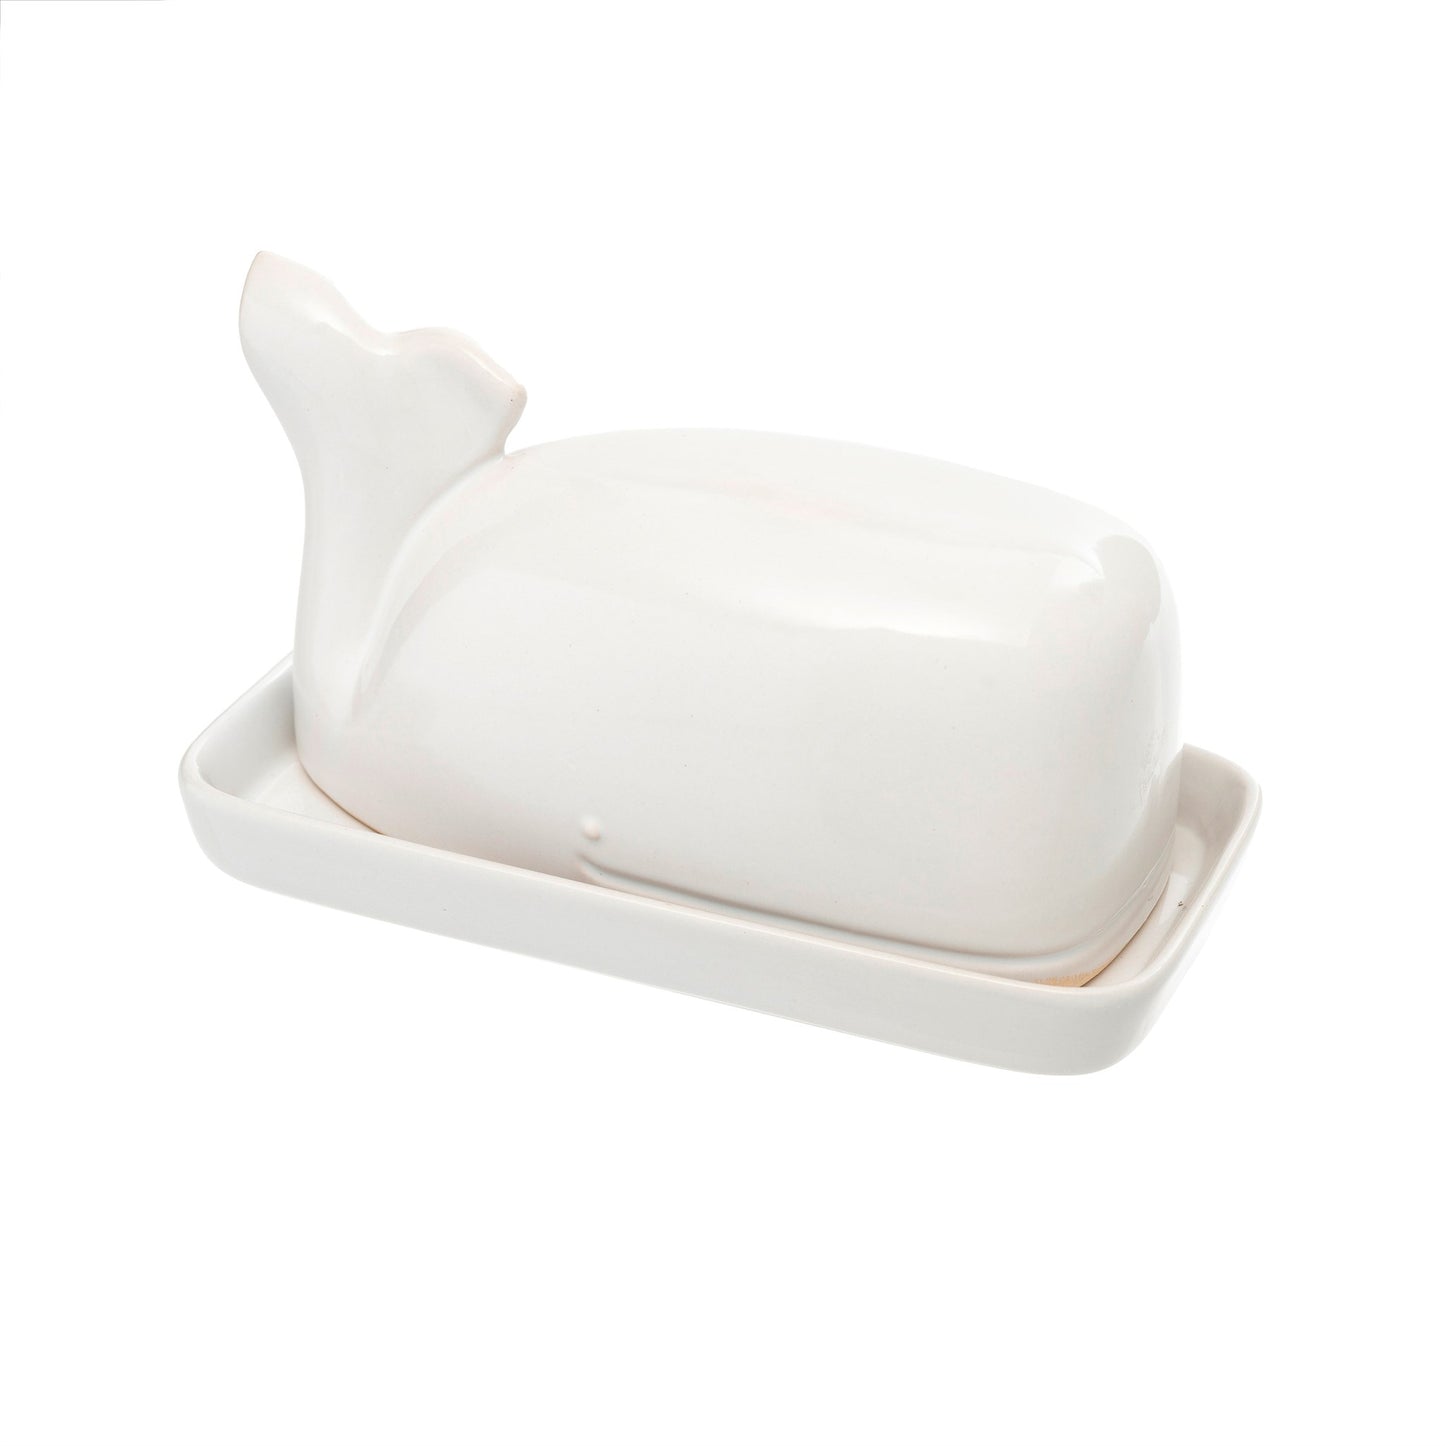 Moby Dick Whale White Butter Dish